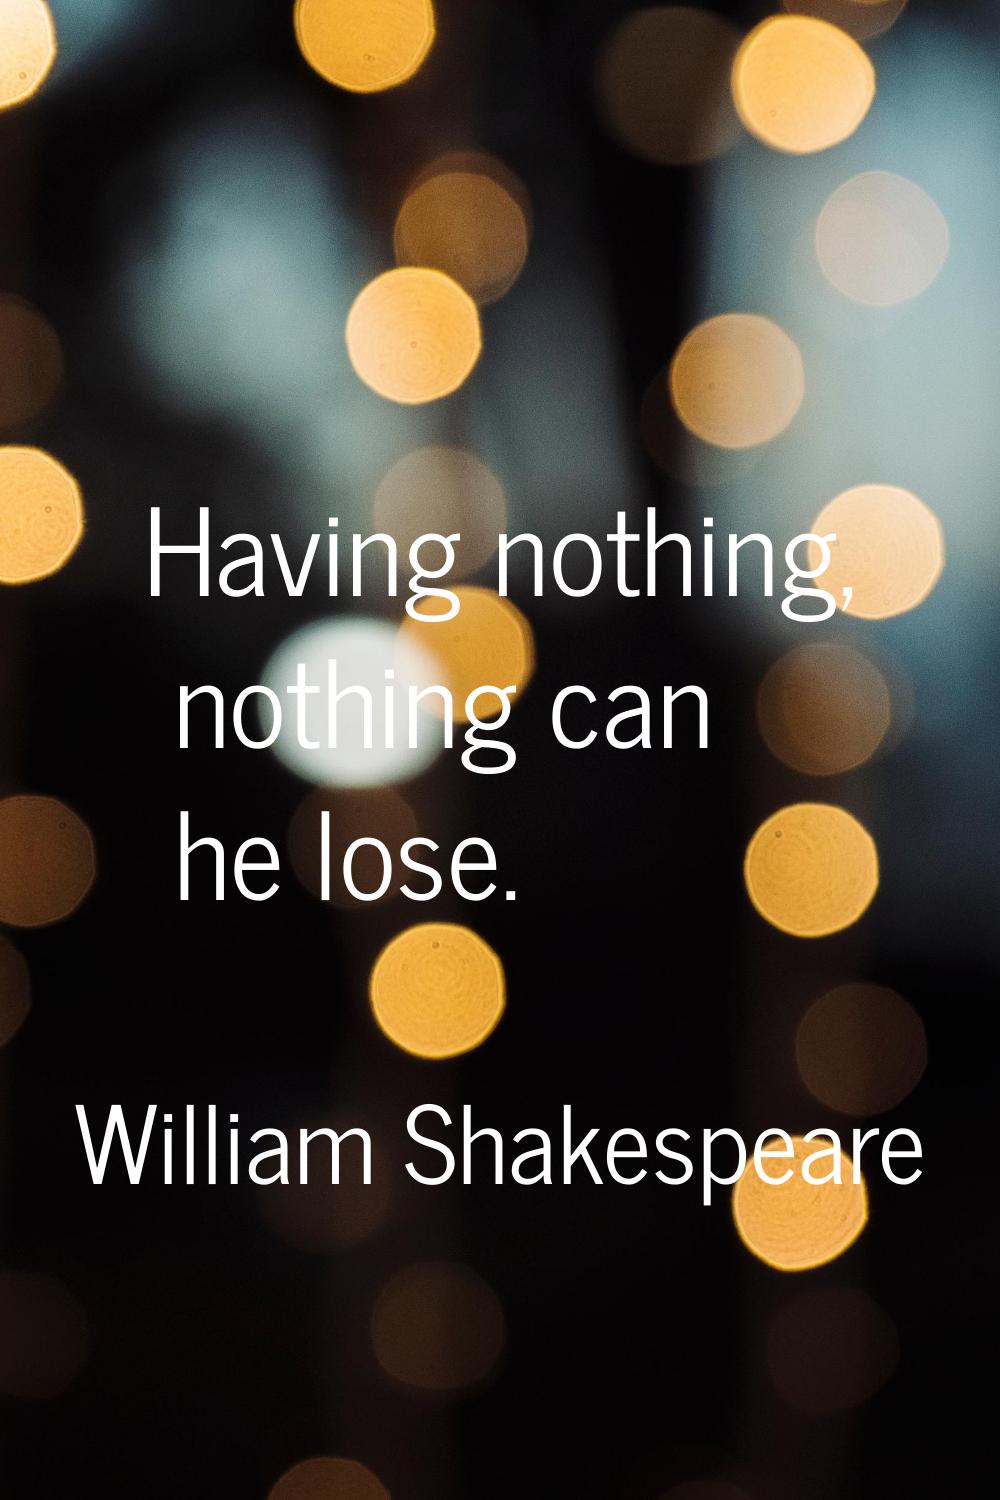 Having nothing, nothing can he lose.